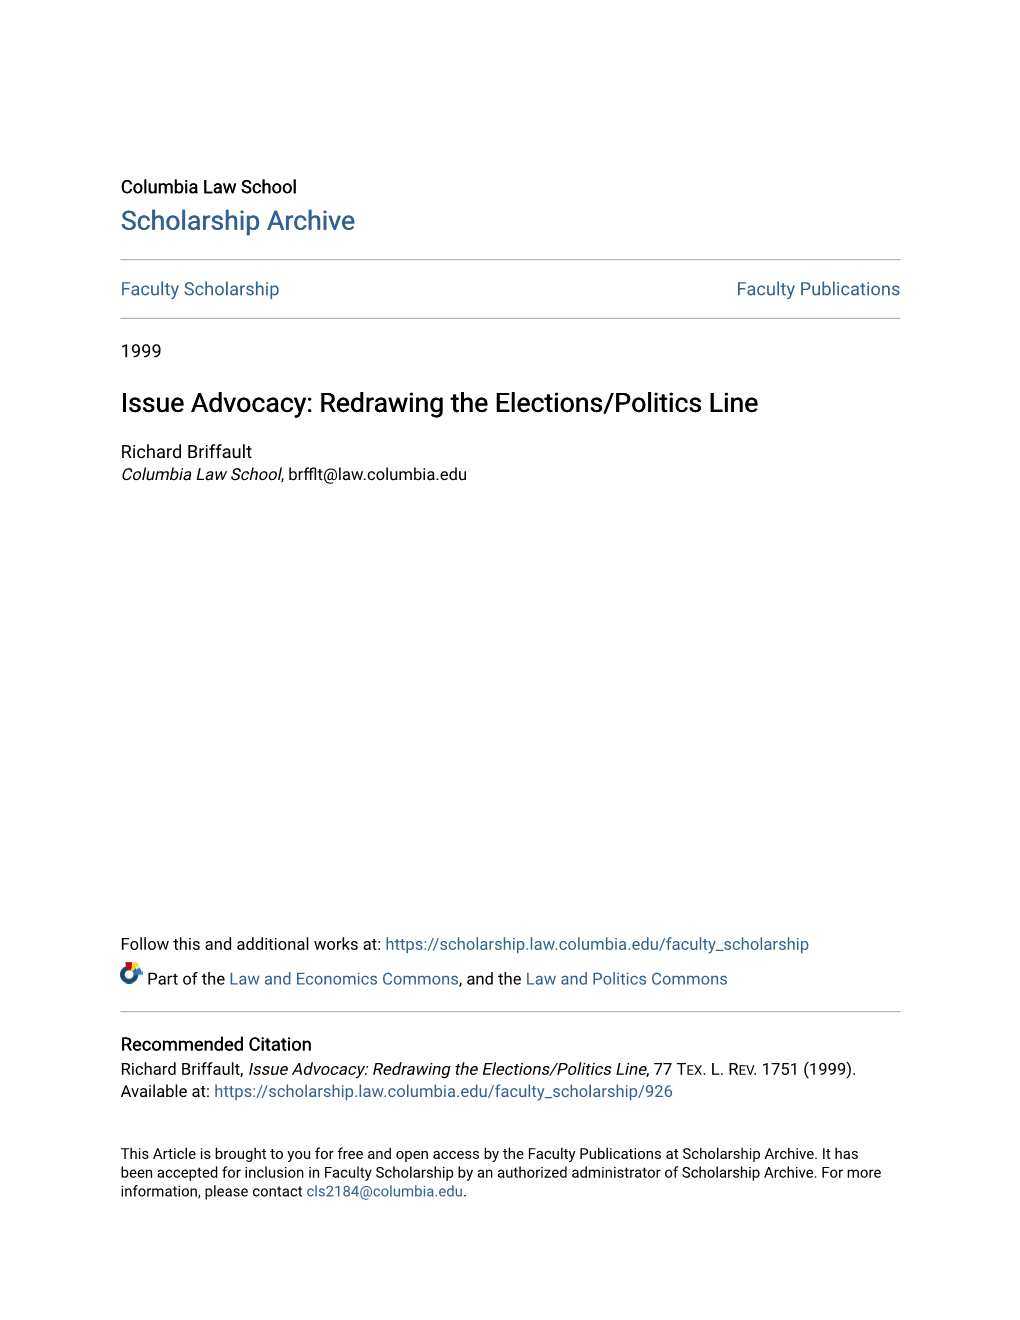 Issue Advocacy: Redrawing the Elections/Politics Line